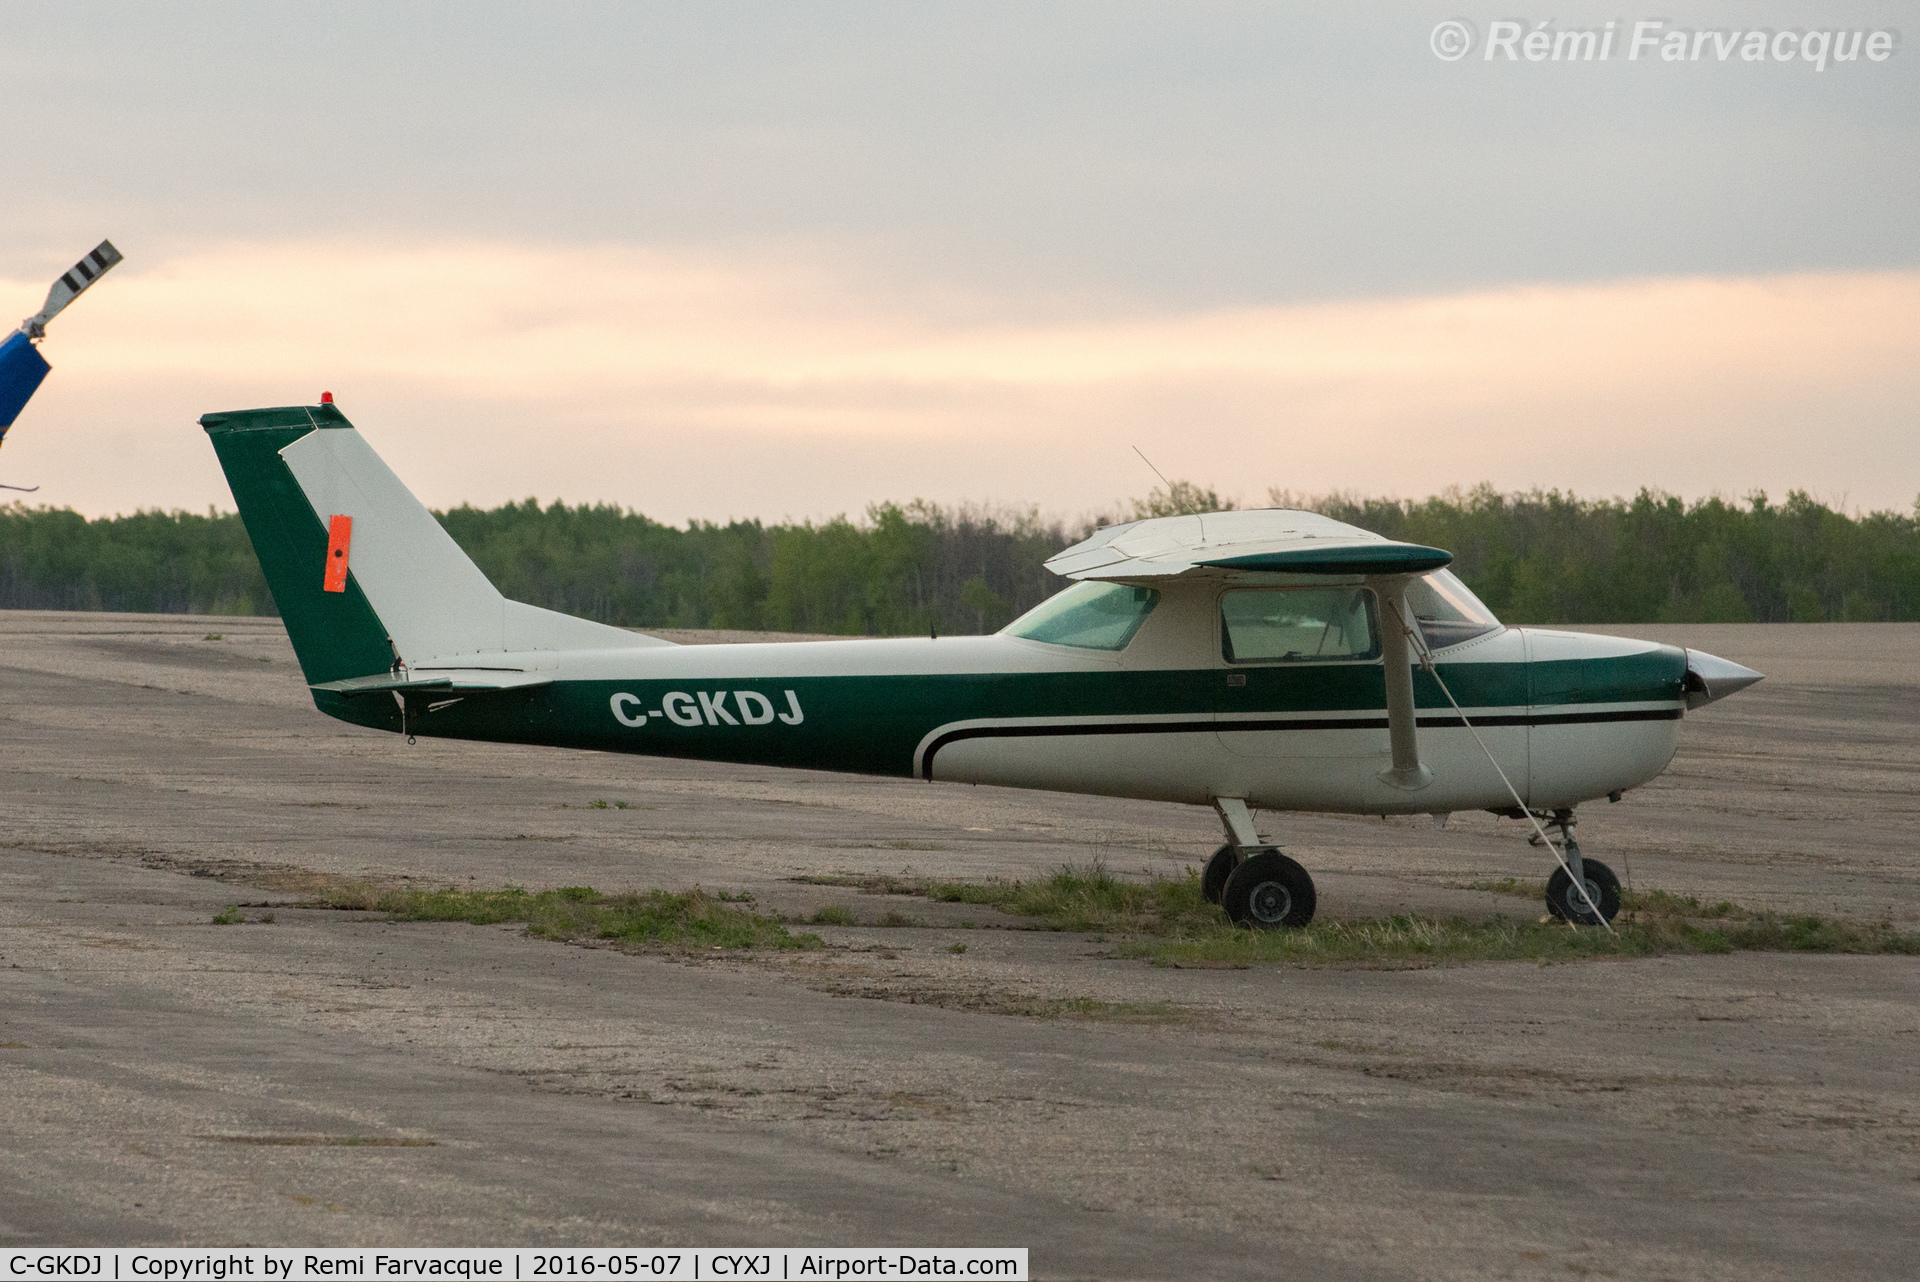 C-GKDJ, 1968 Cessna 150H C/N 15067897, Tied down west of control tower